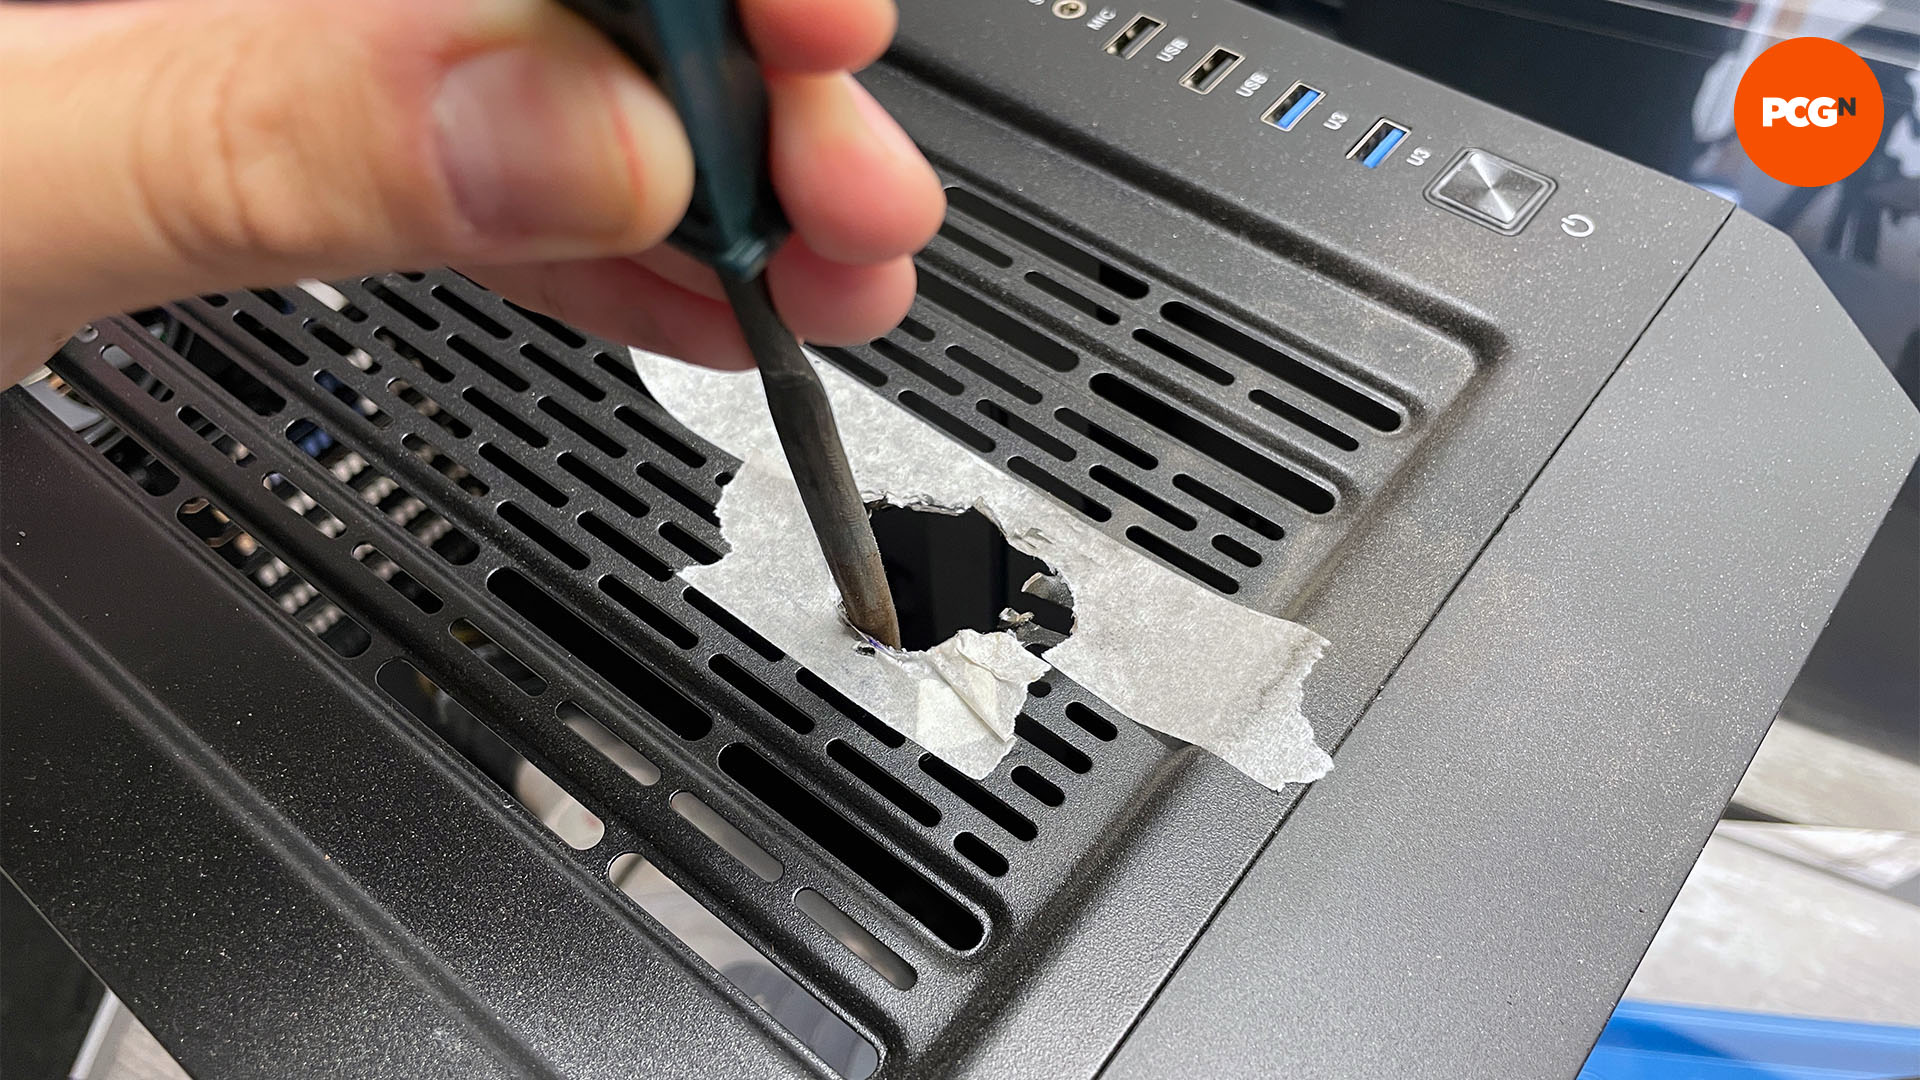 How to fit a fill port to your PC water cooling system: File the edges